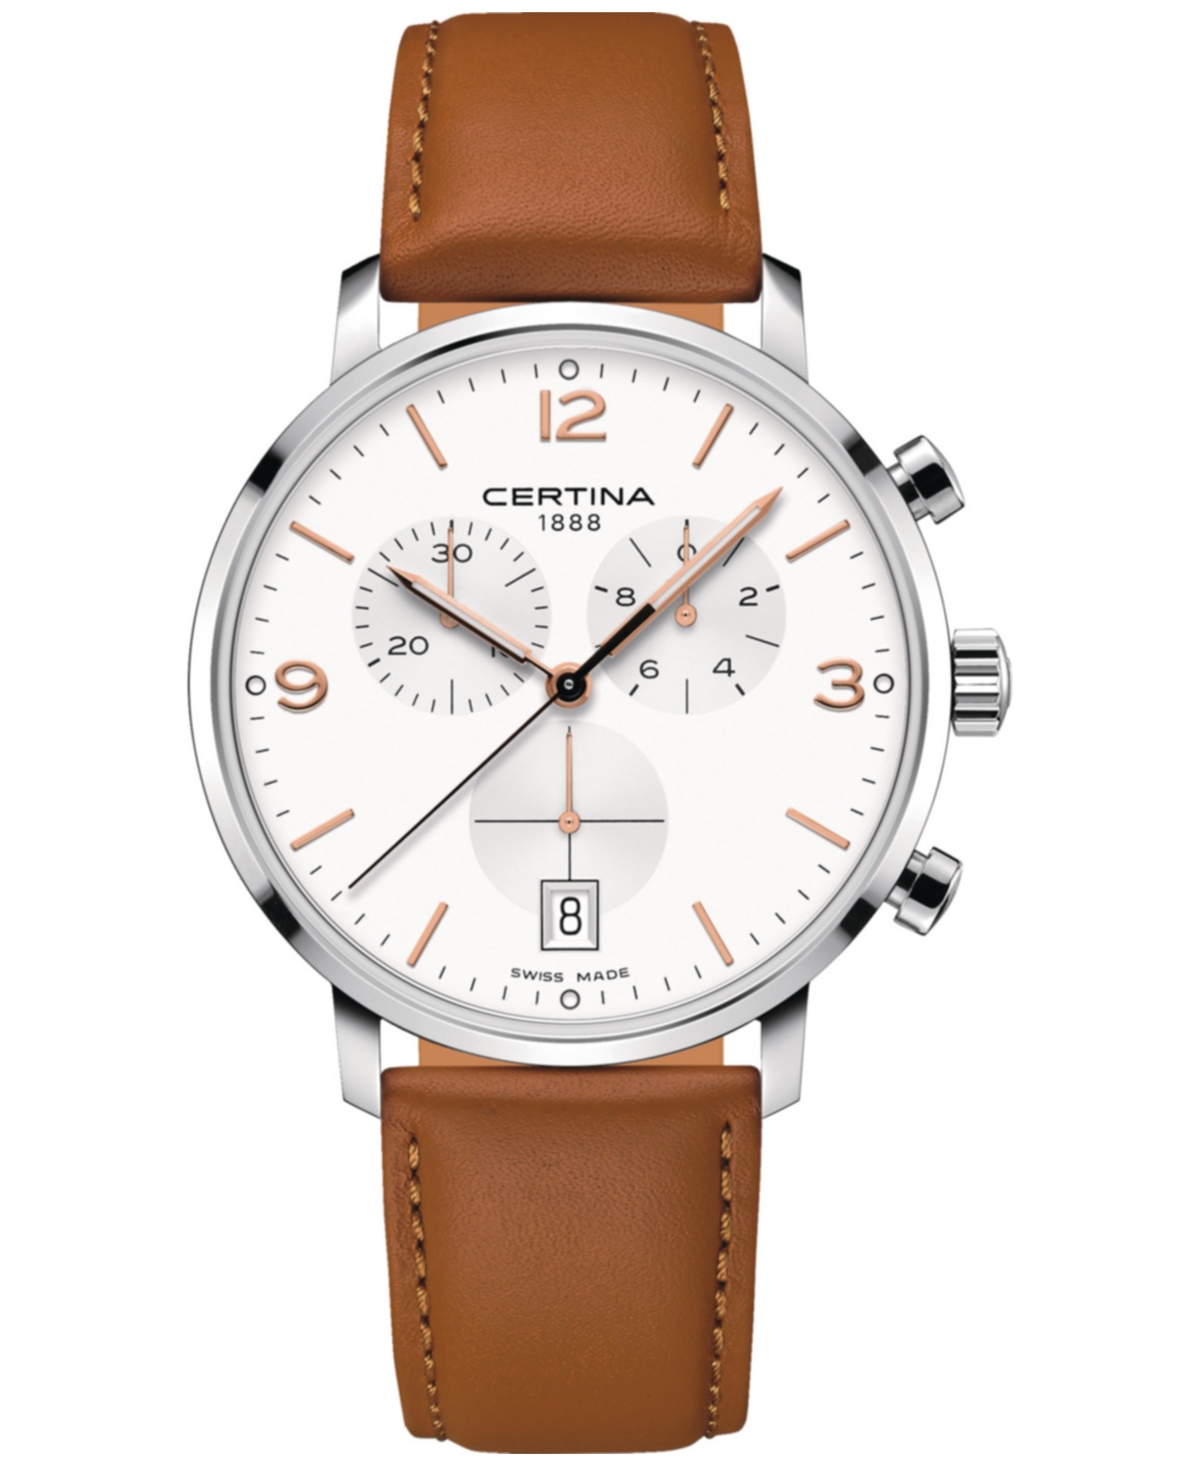 Certina Men's Swiss Chronograph Ds Caimano Brown Leather Strap Watch 42mm In White